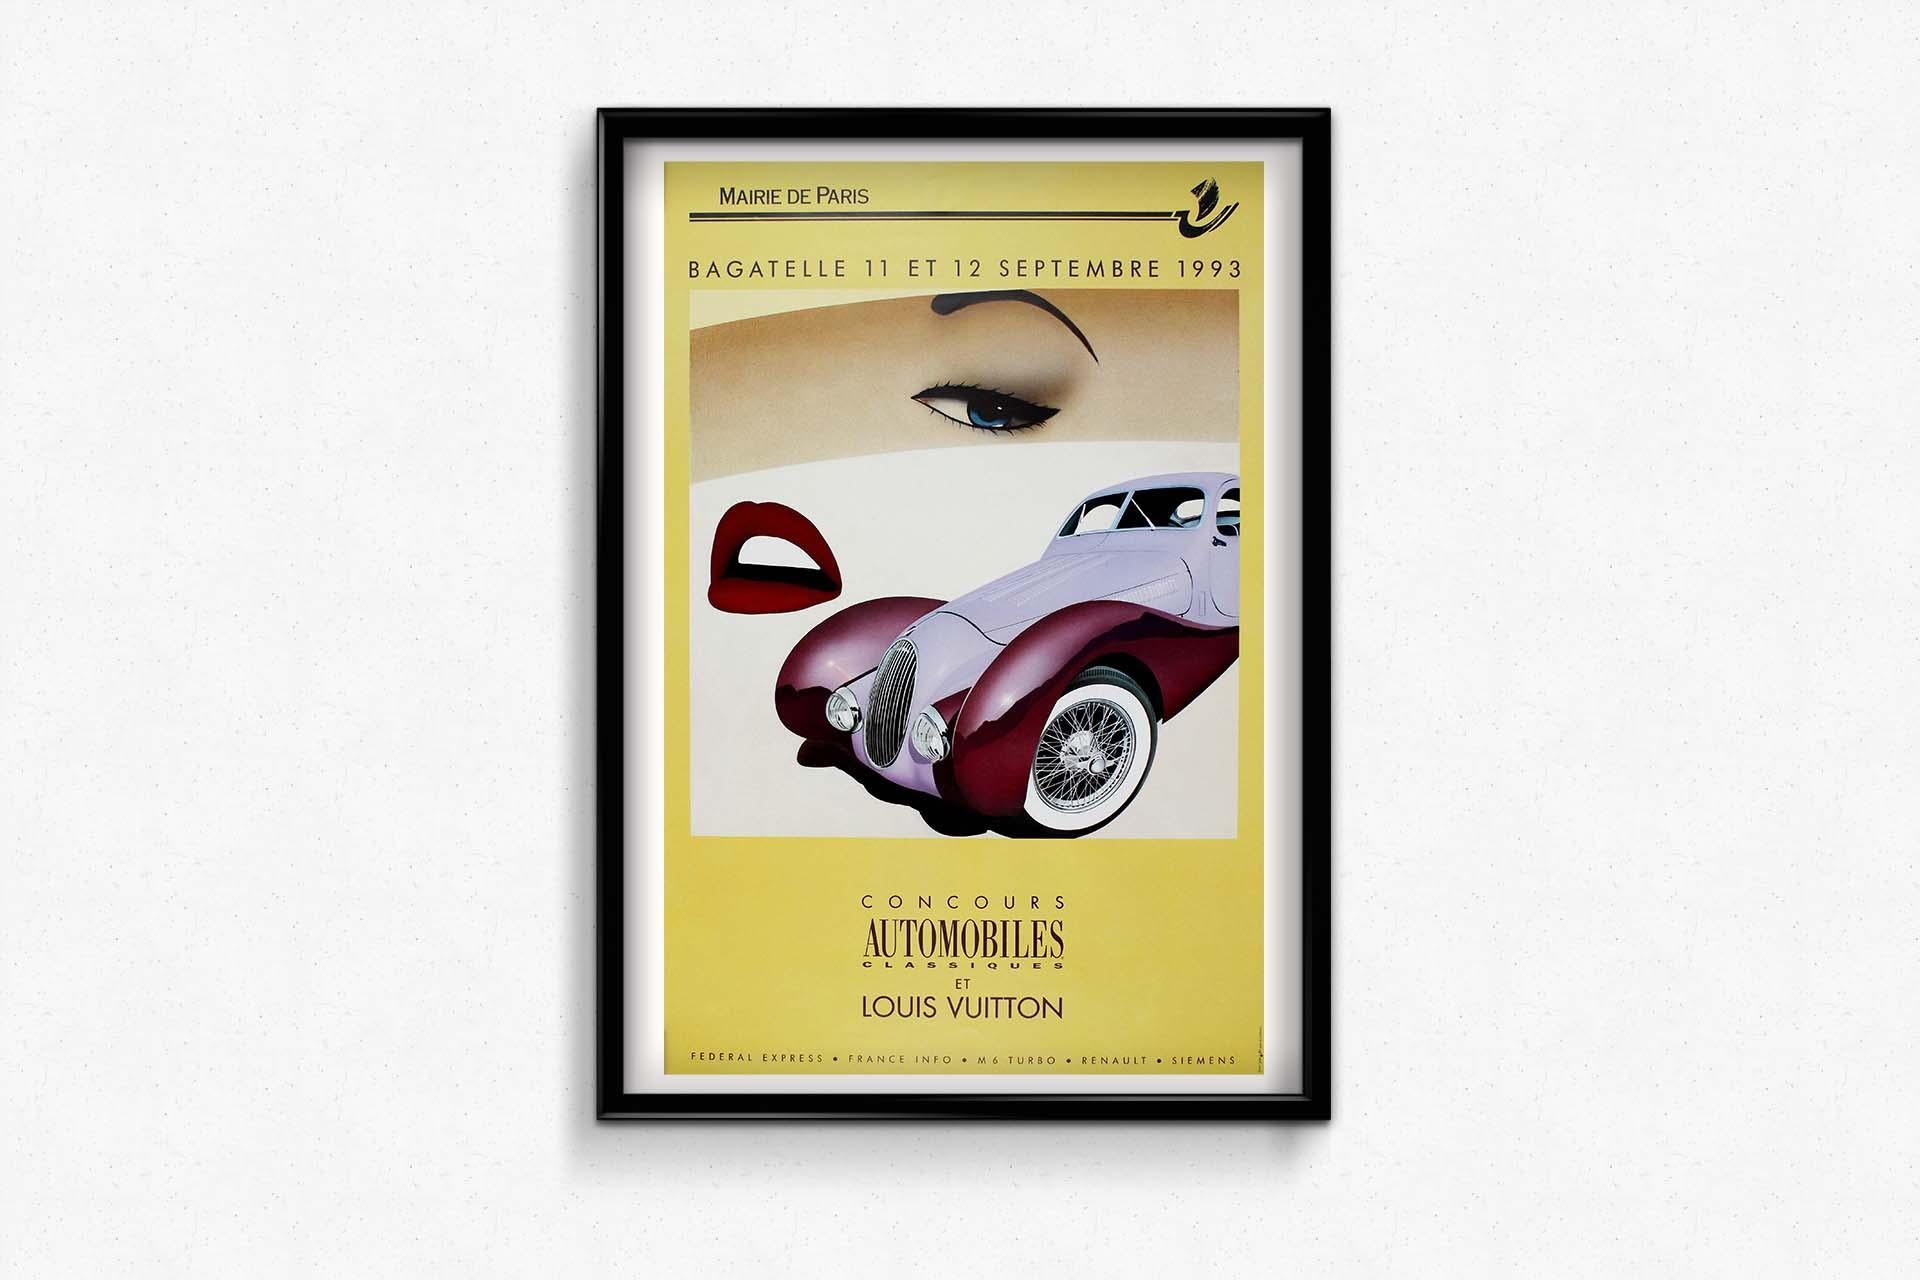 Crafted by the esteemed French graphic artist Gérard Courbouleix–Dénériaz, renowned as Razzia, the original 1993 poster 